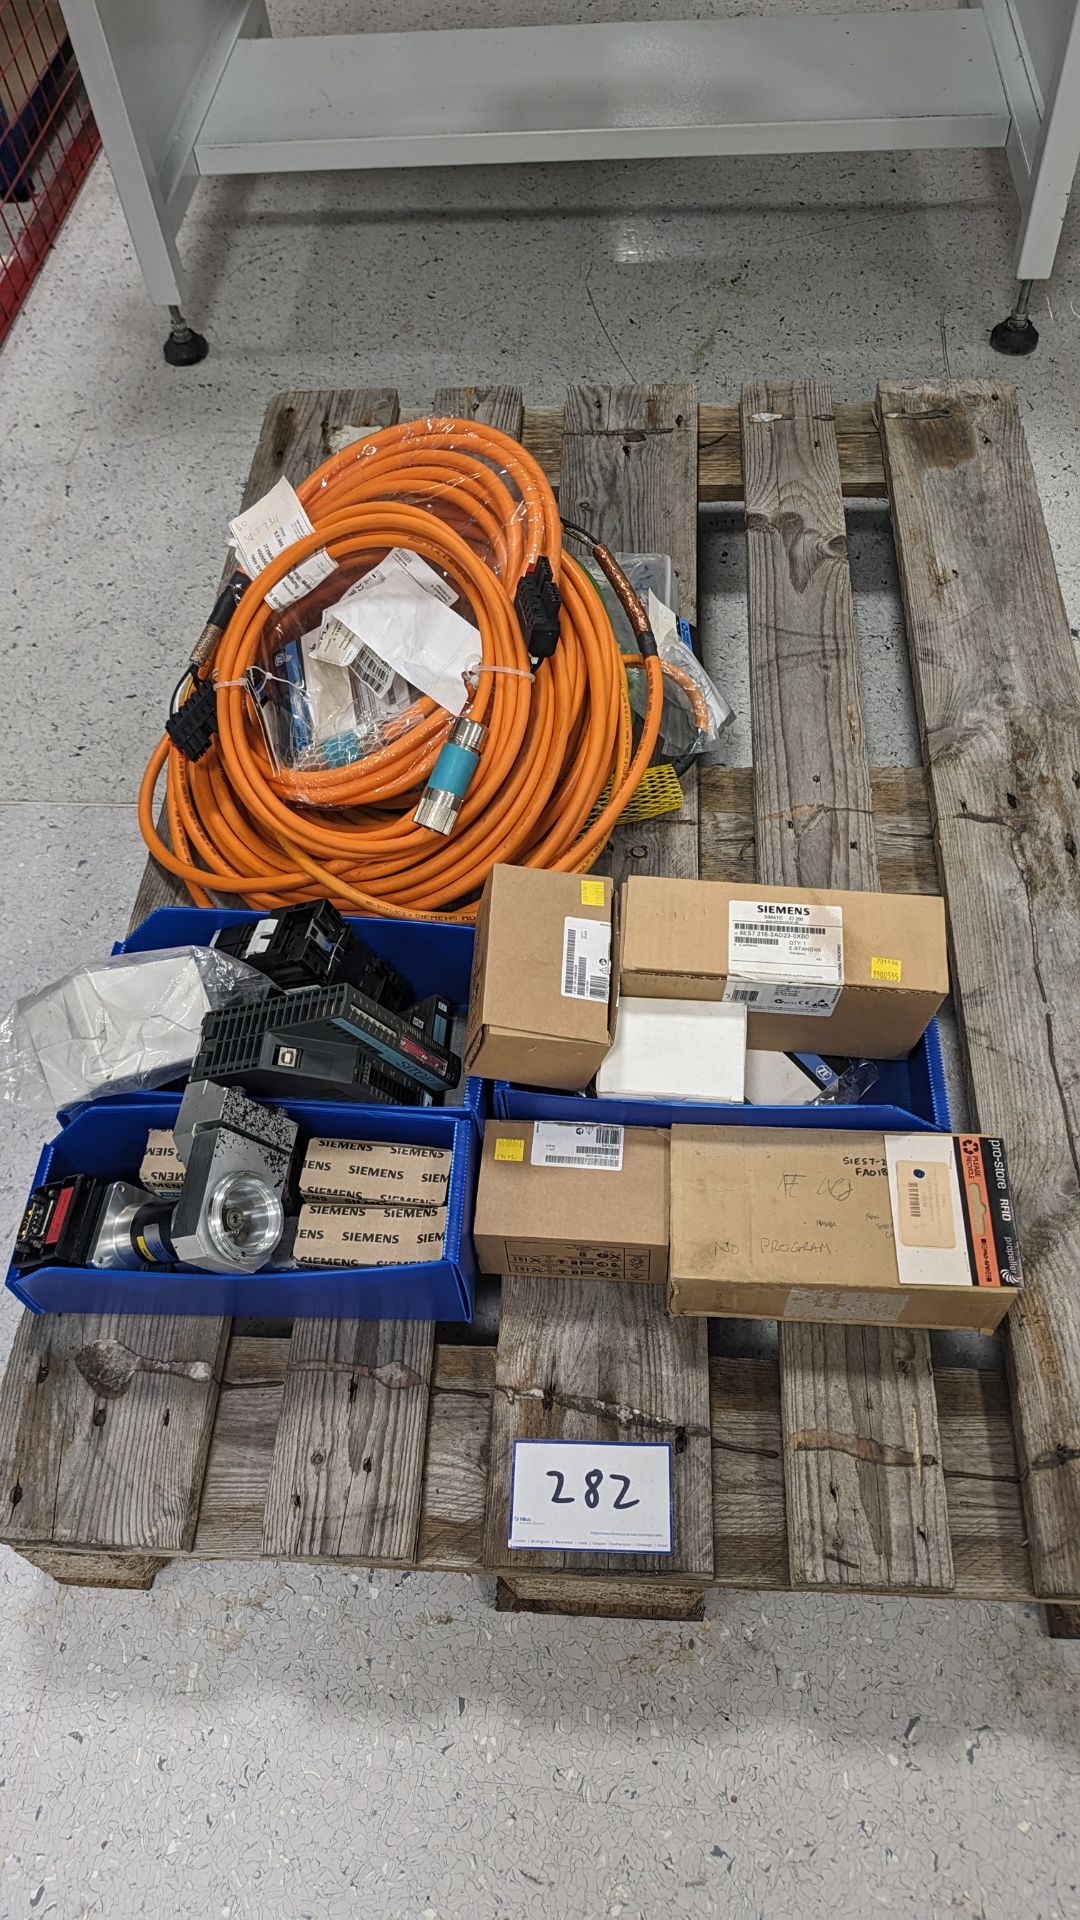 Pallet containing various SIEMENS spares